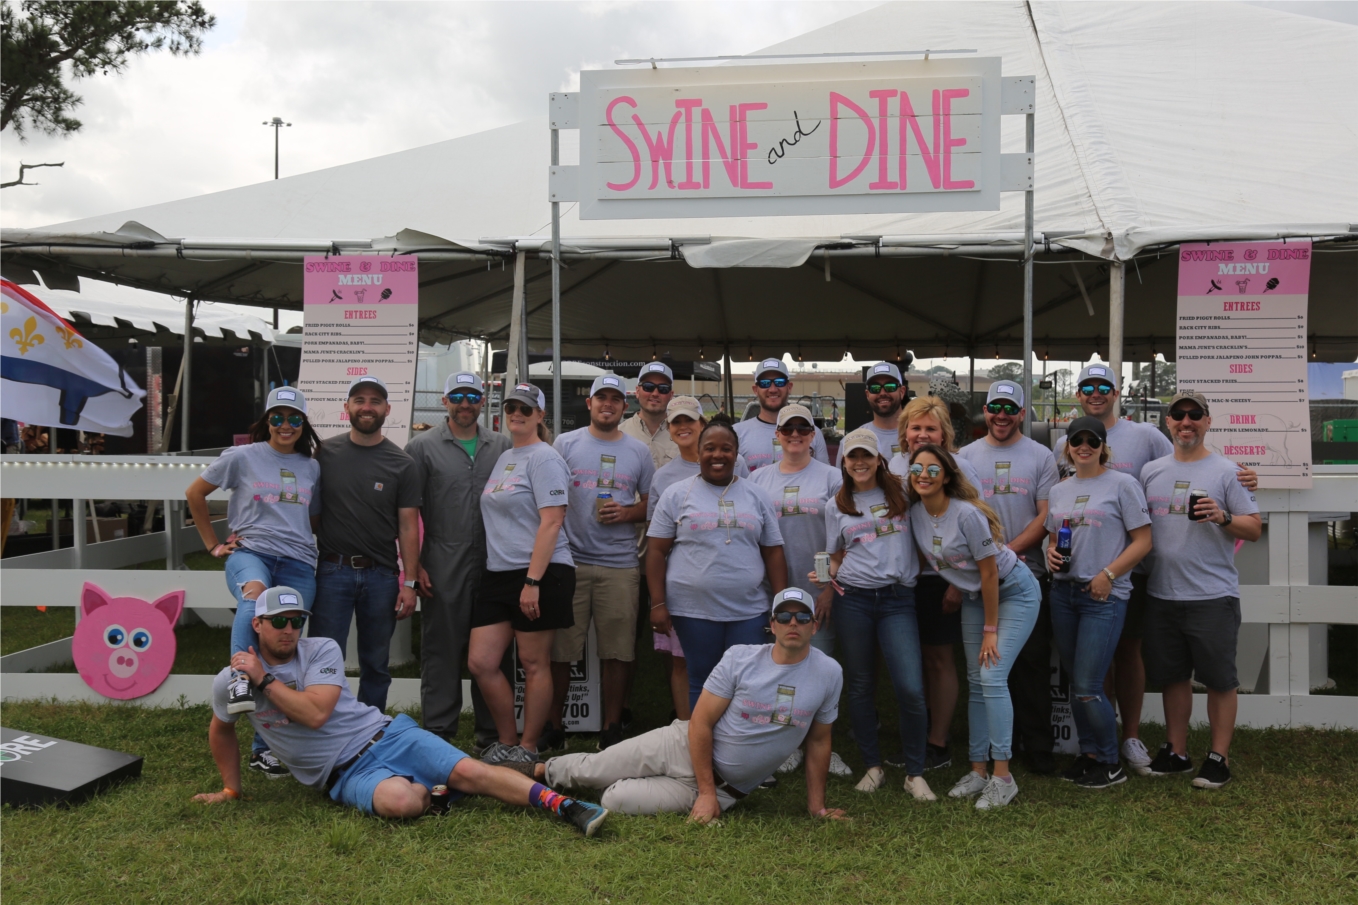 Hogs for the Cause team "Swine and Dine"